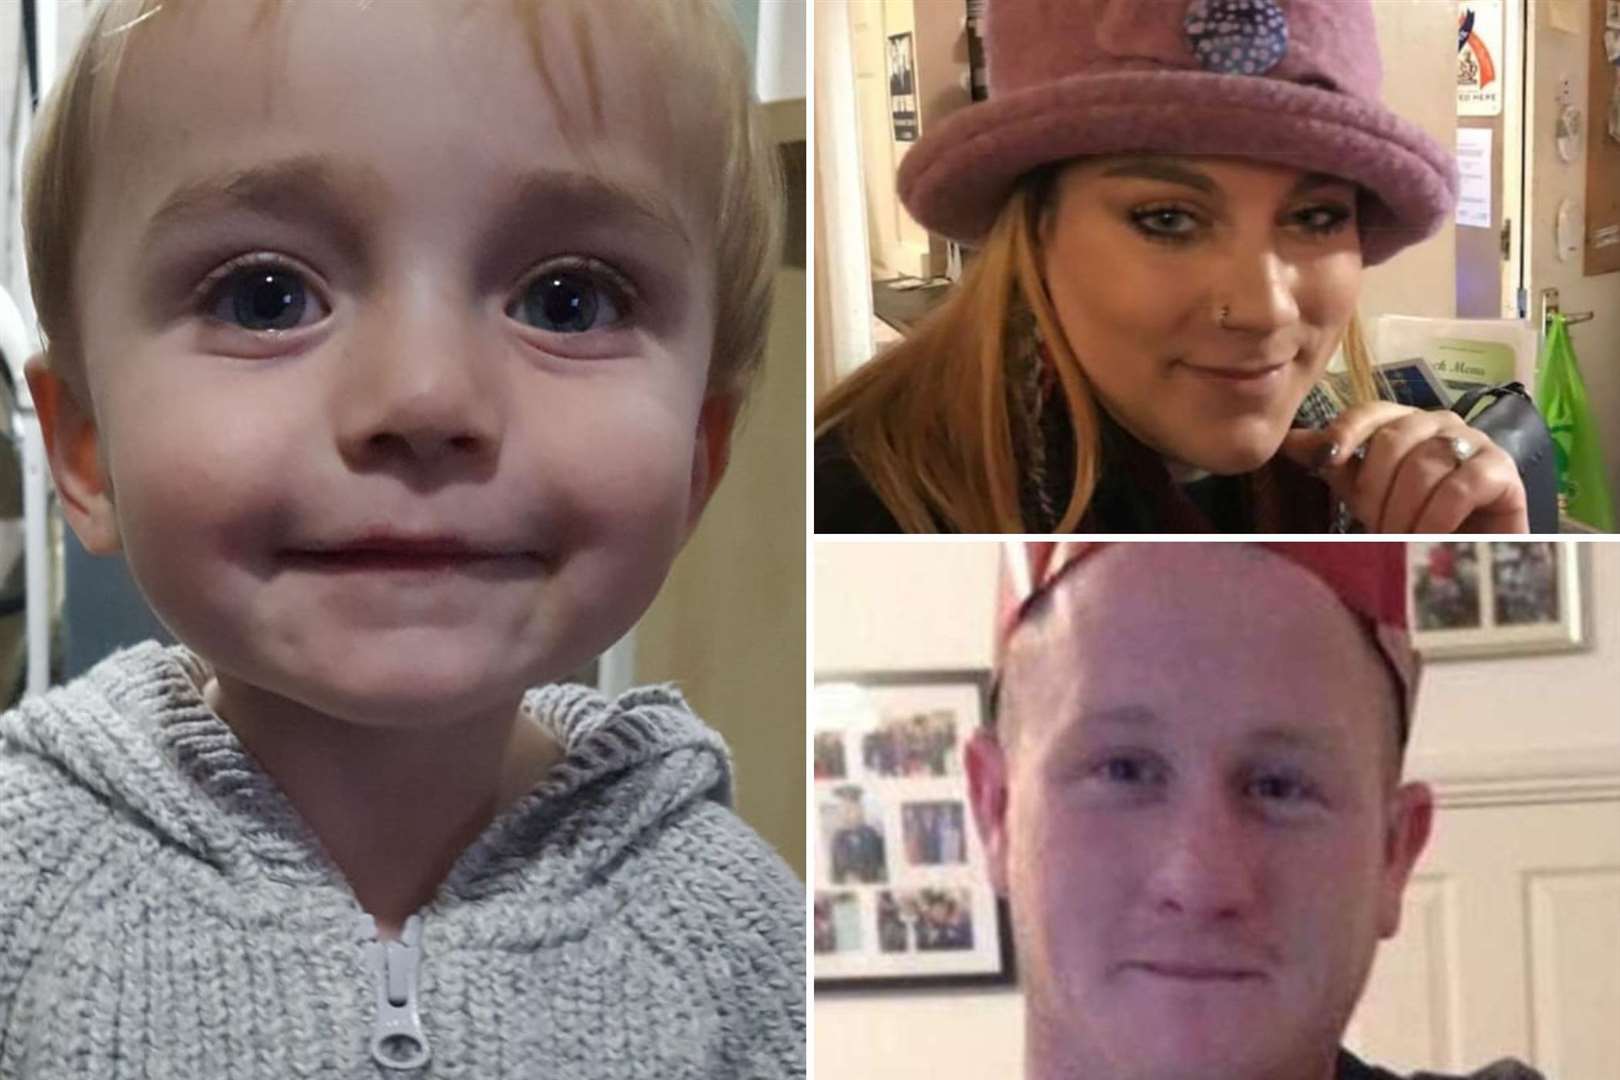 Jack Benham and Sian Hedges were found guilty of murdering toddler Alfie Phillips